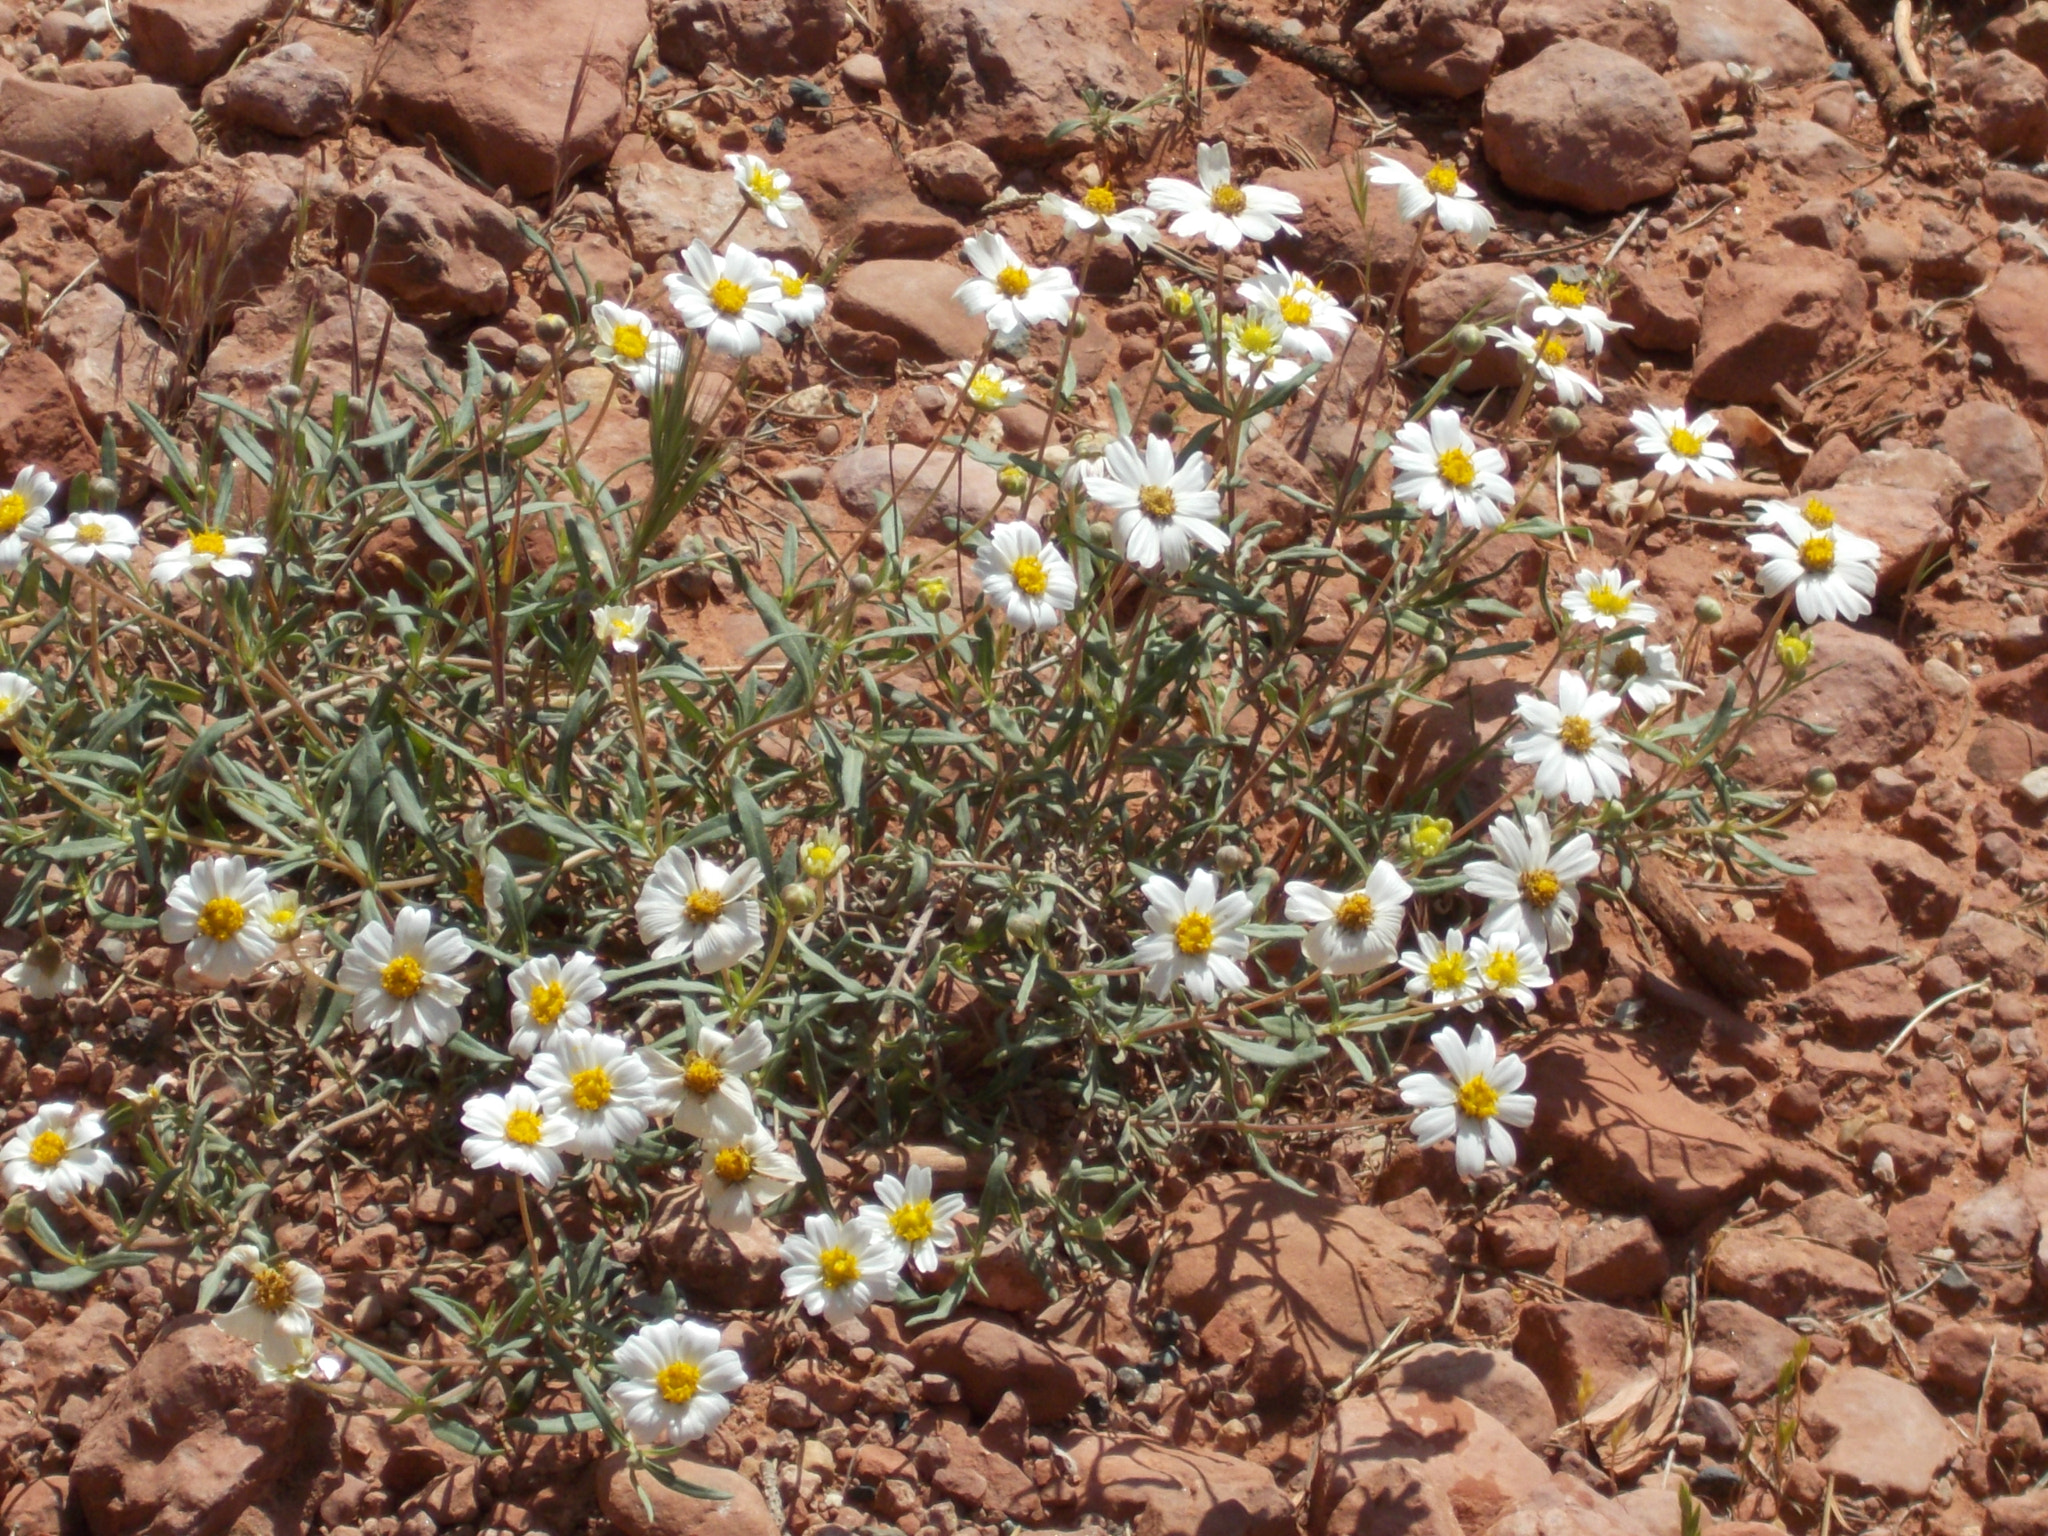 Nikon COOLPIX L27 sample photo. Daisies in the desert photography